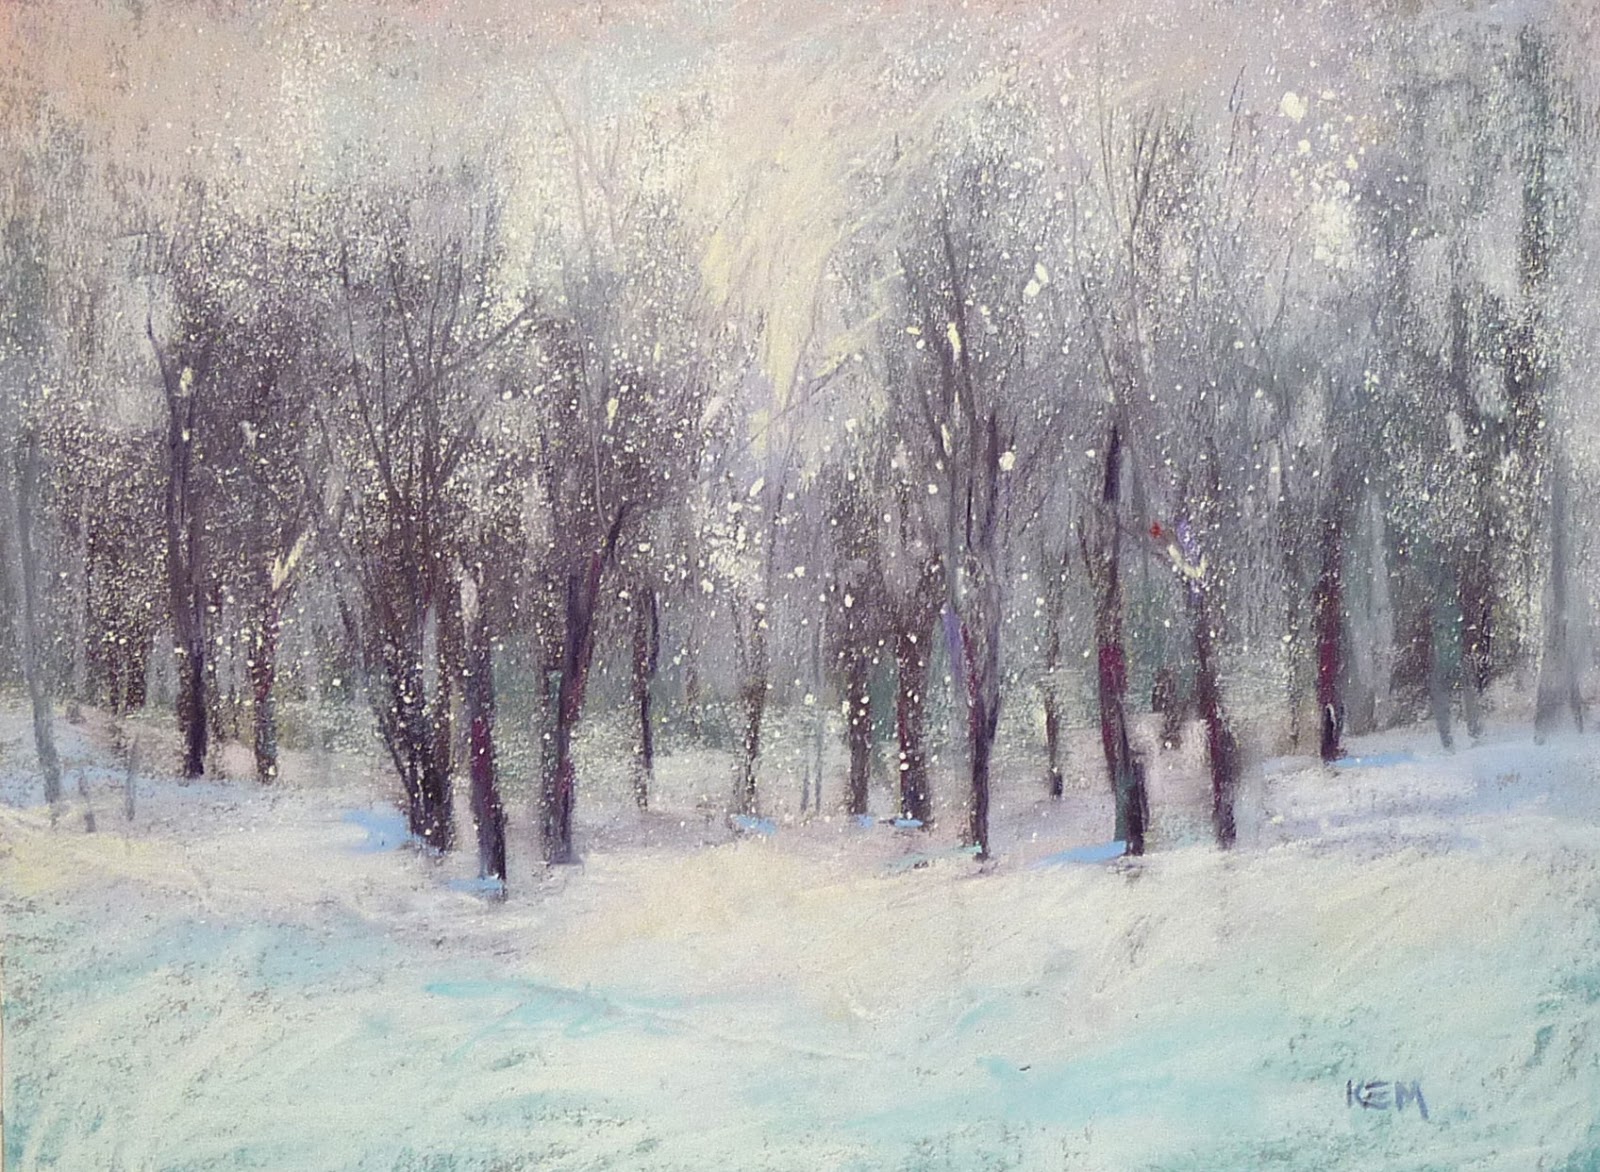 Painting My World: A Simple Technique for Painting Falling Snow